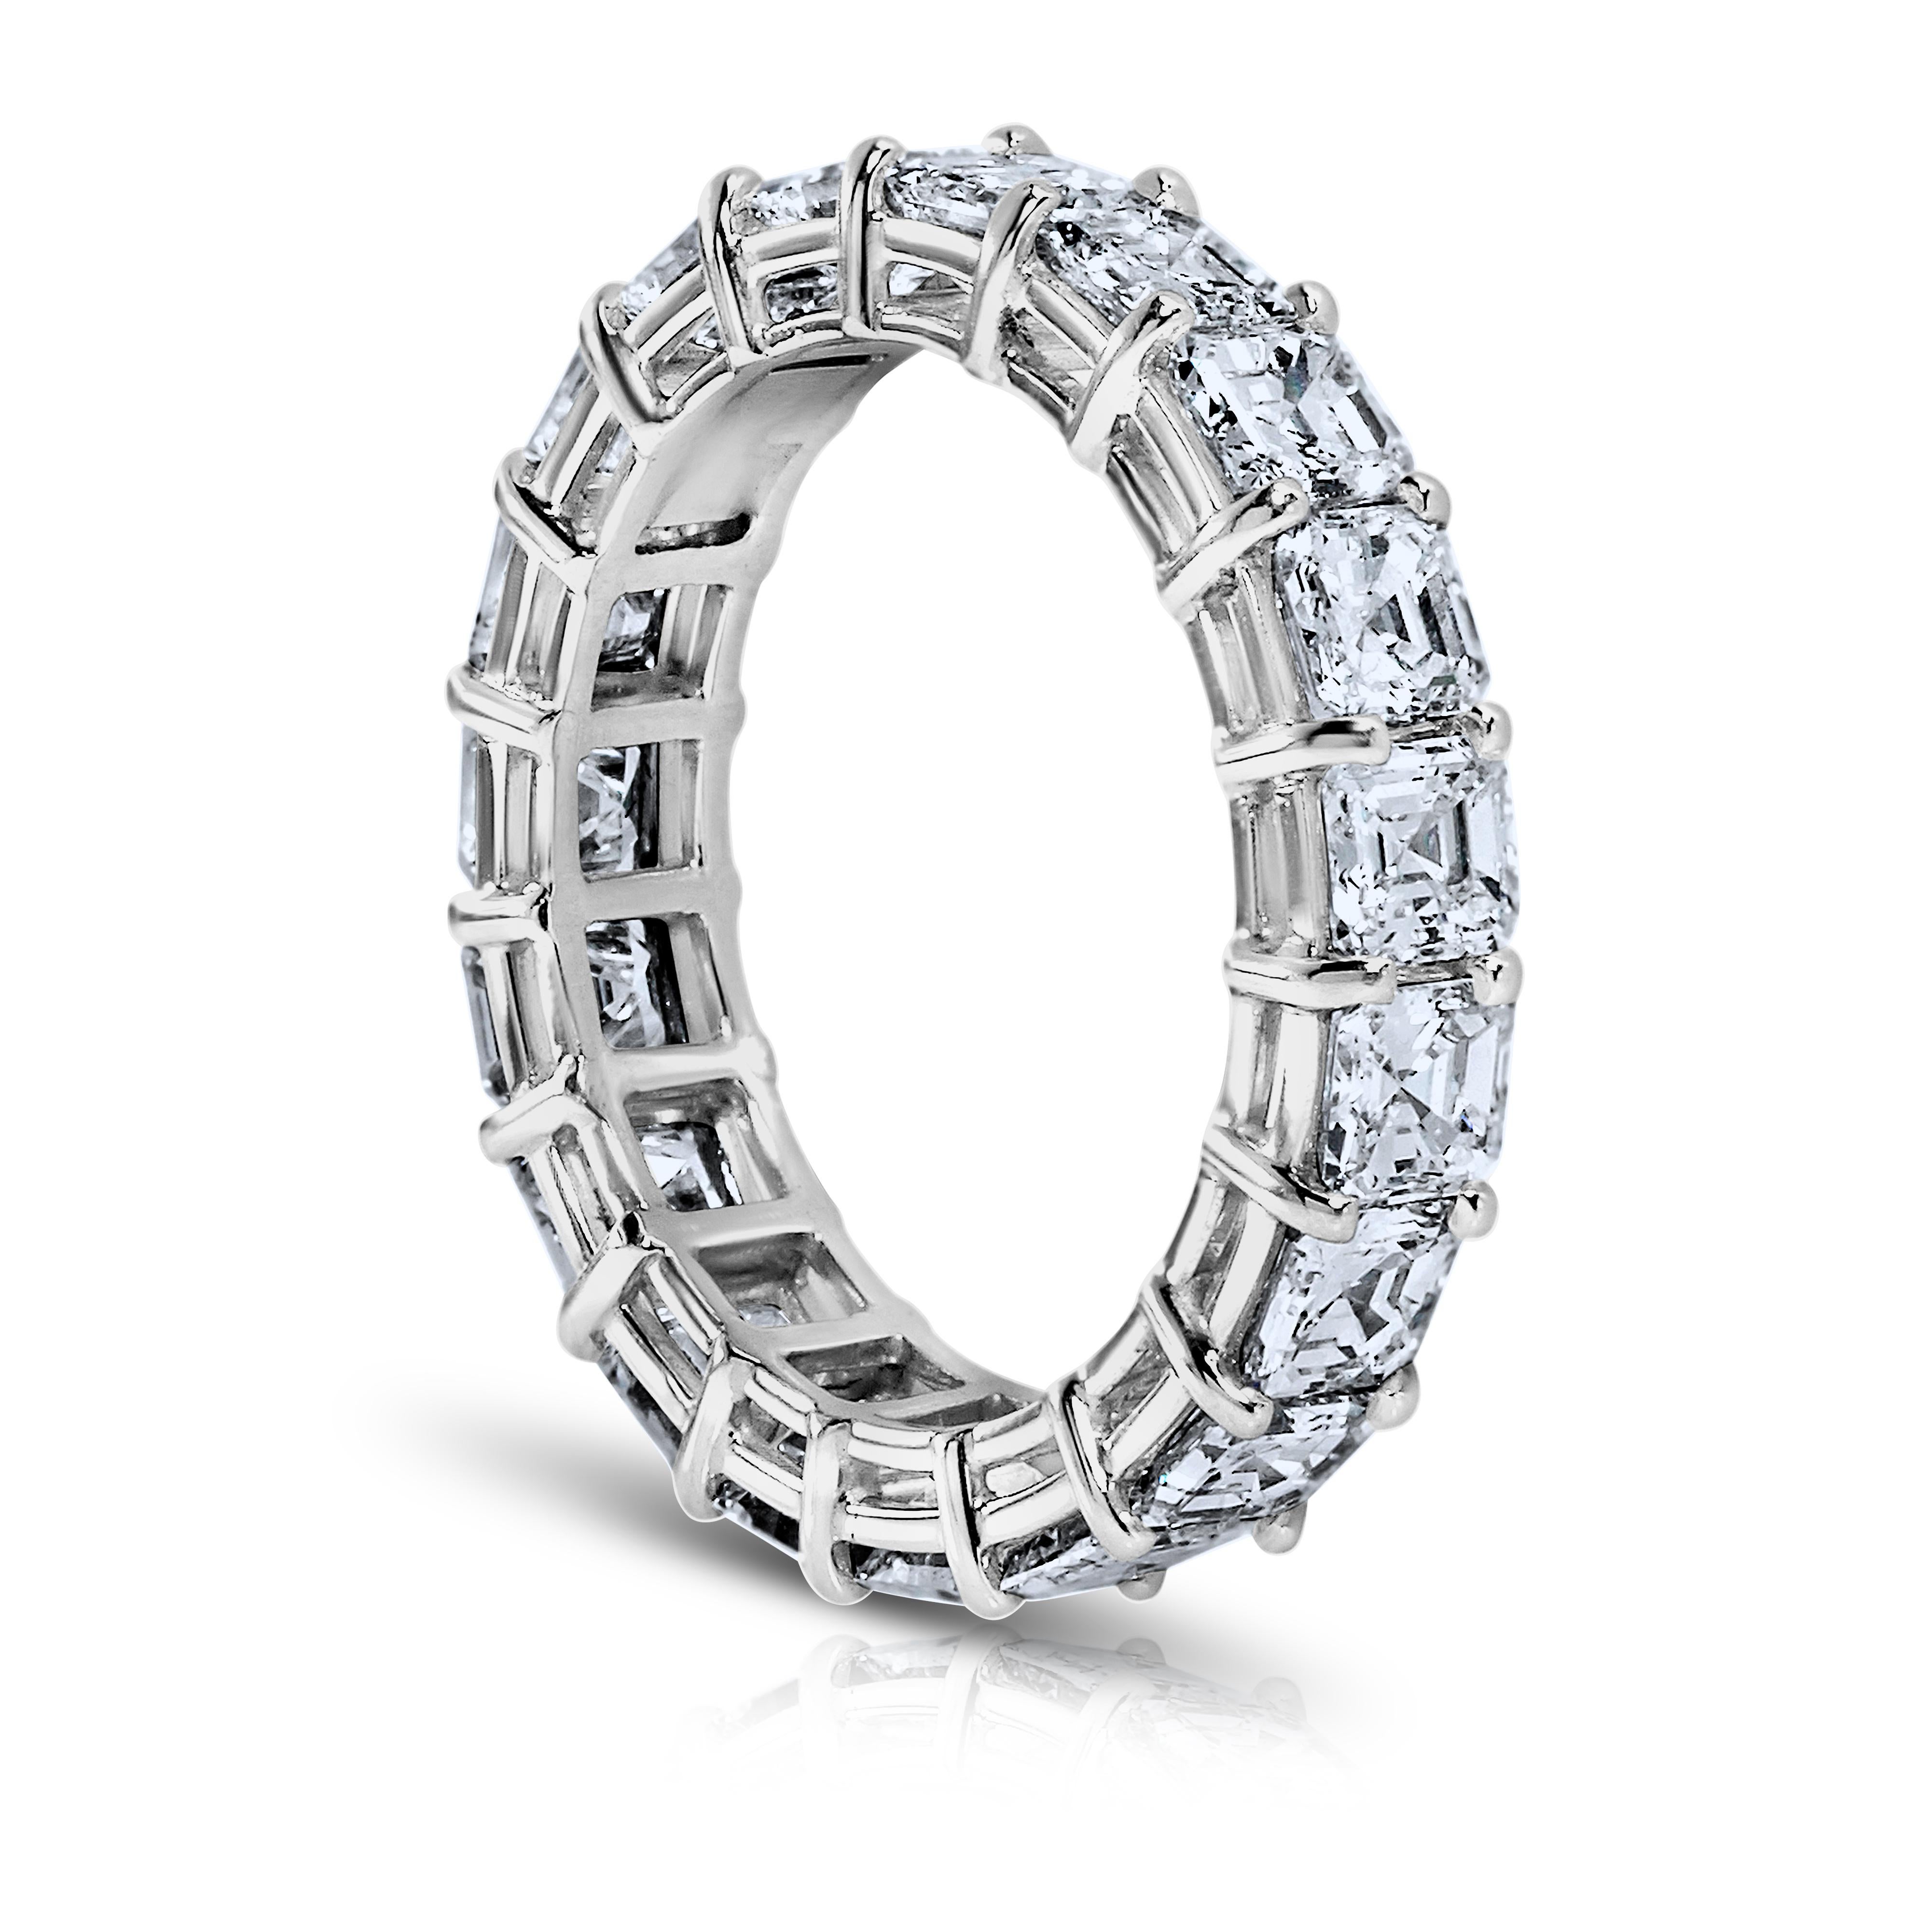 
Asher Cut diamond ring platinum eternity band shared prong style with a gallery.
19 perfectly matched diamonds weighing a minimum of 3.80 cts. G.I.A certificates for each diamond . Ranging from D-F in color . VVS1-VS2 in clarity .Finger size 5.